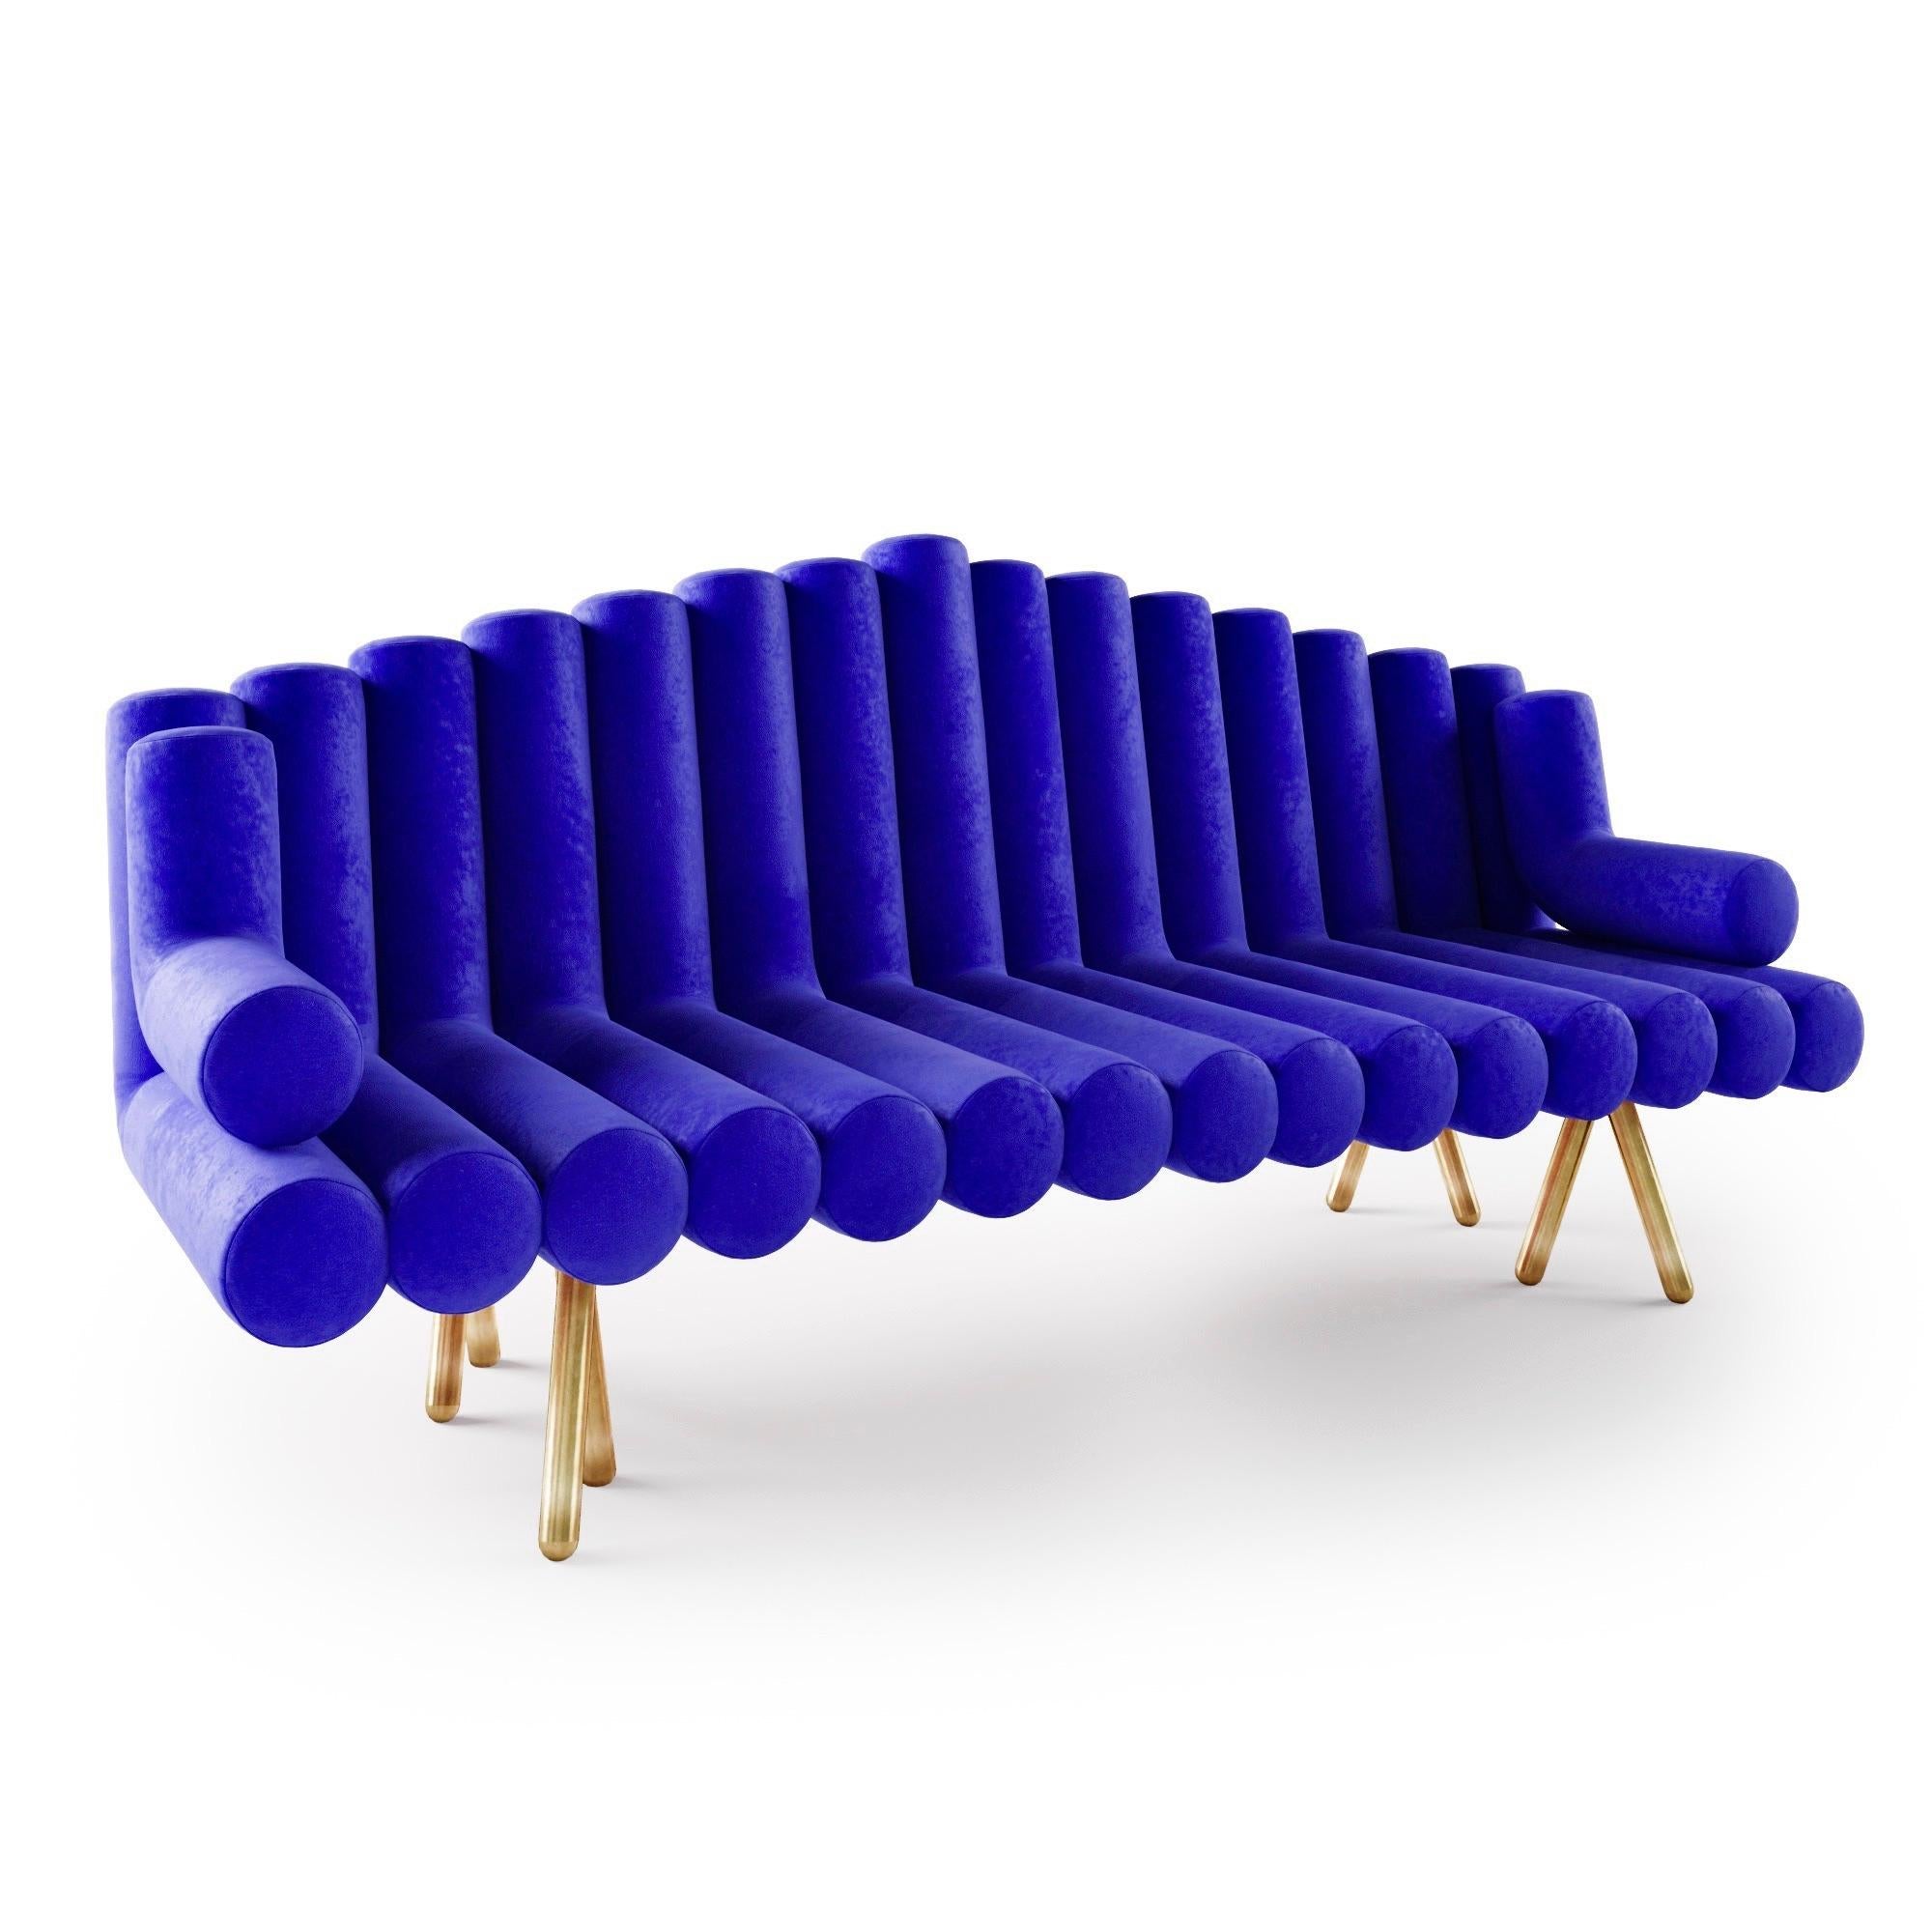 The Flute Sofa takes its inspiration from the pan flute. Unique and beautiful the Flute Sofa is one of Troy Smith's best sellers. Built to exacting standards and quality. The flute sofa is elegantly crafted and built to last. Each tube is